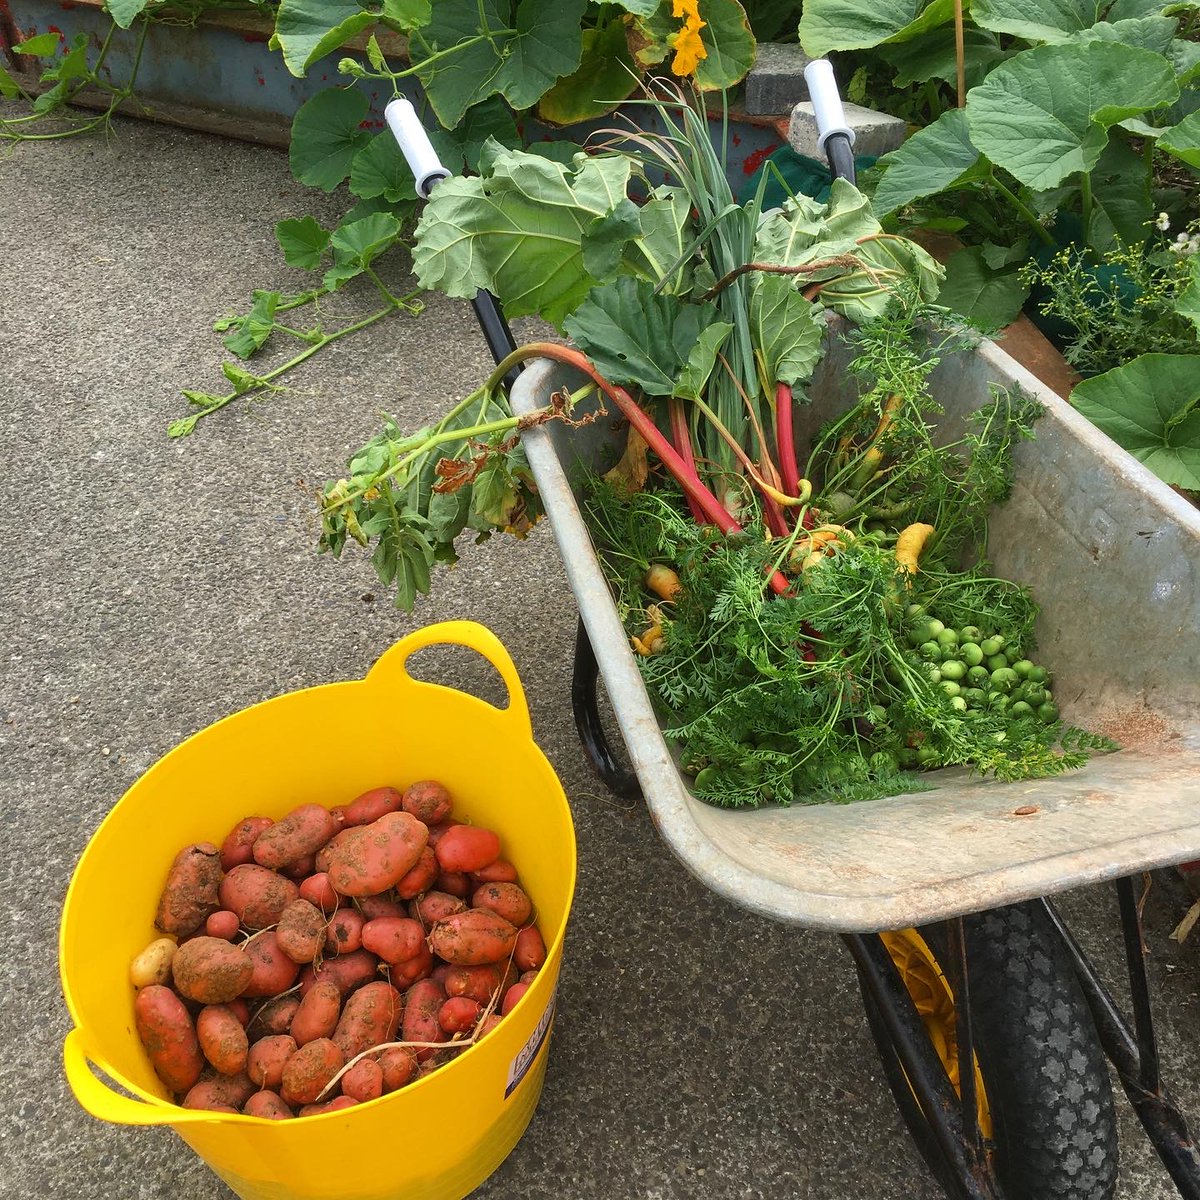 It’s harvest day at the Rediscovery Centre! Today we dug up some Désiréé potatoes, carrots, rhubarb, salsify and some seed potatoes for next year.

#rediscoverycentre #urbangrowing #garden #potatoes #vegetables